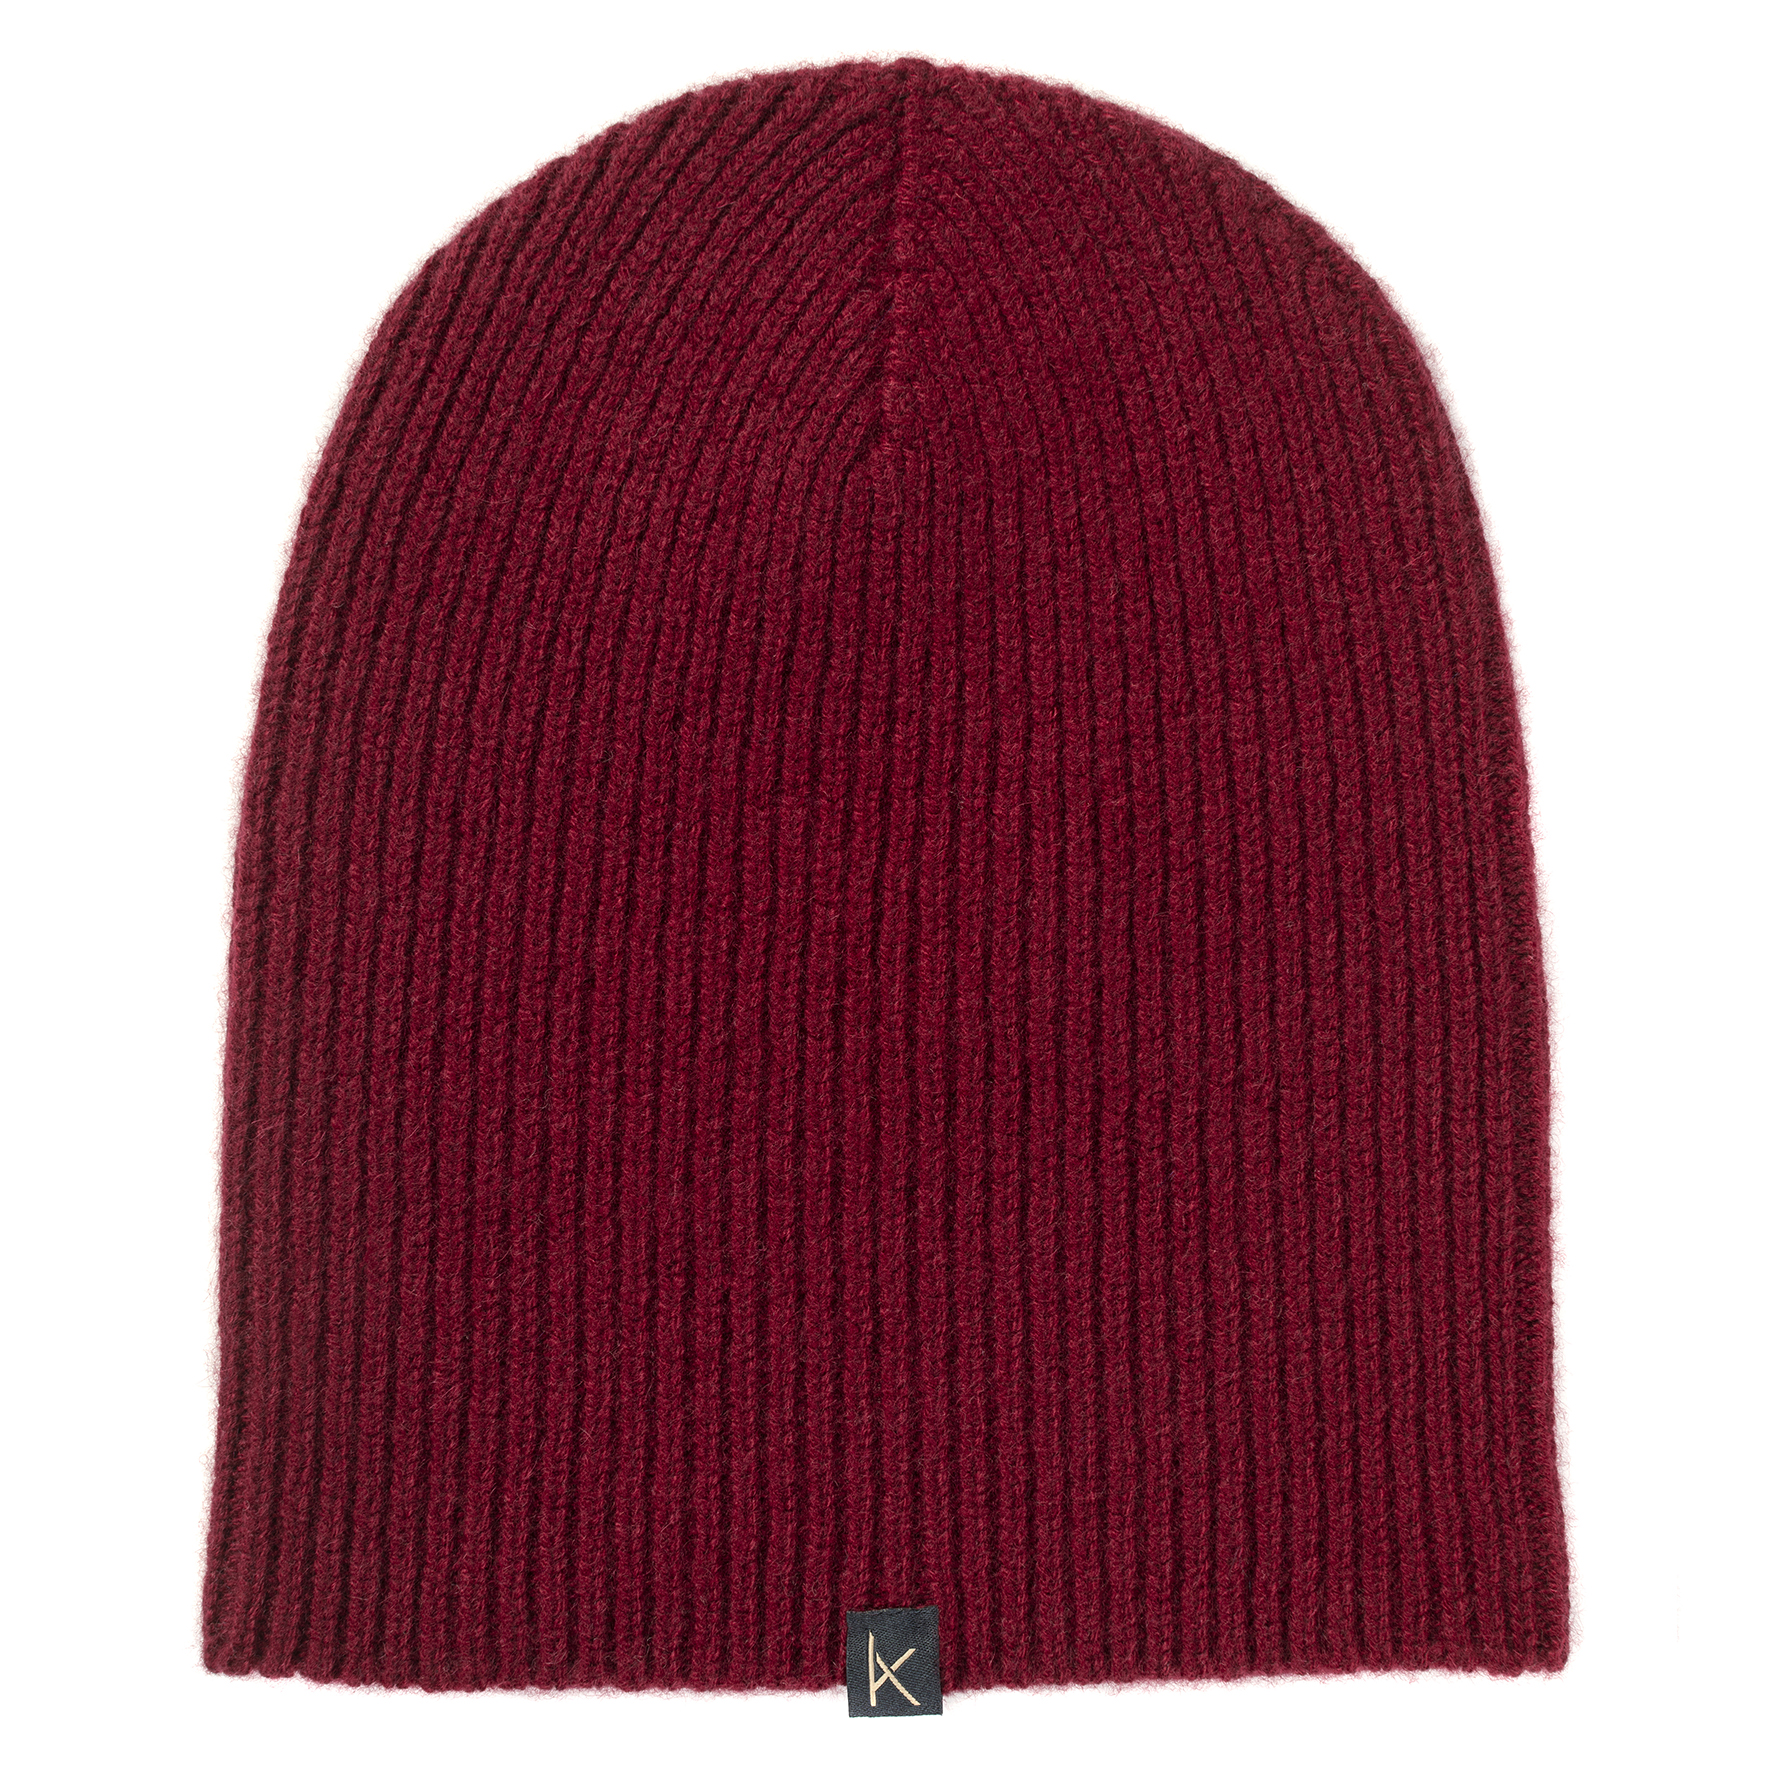 Claret Deluxe Knitted Cashmere Beanie Hat